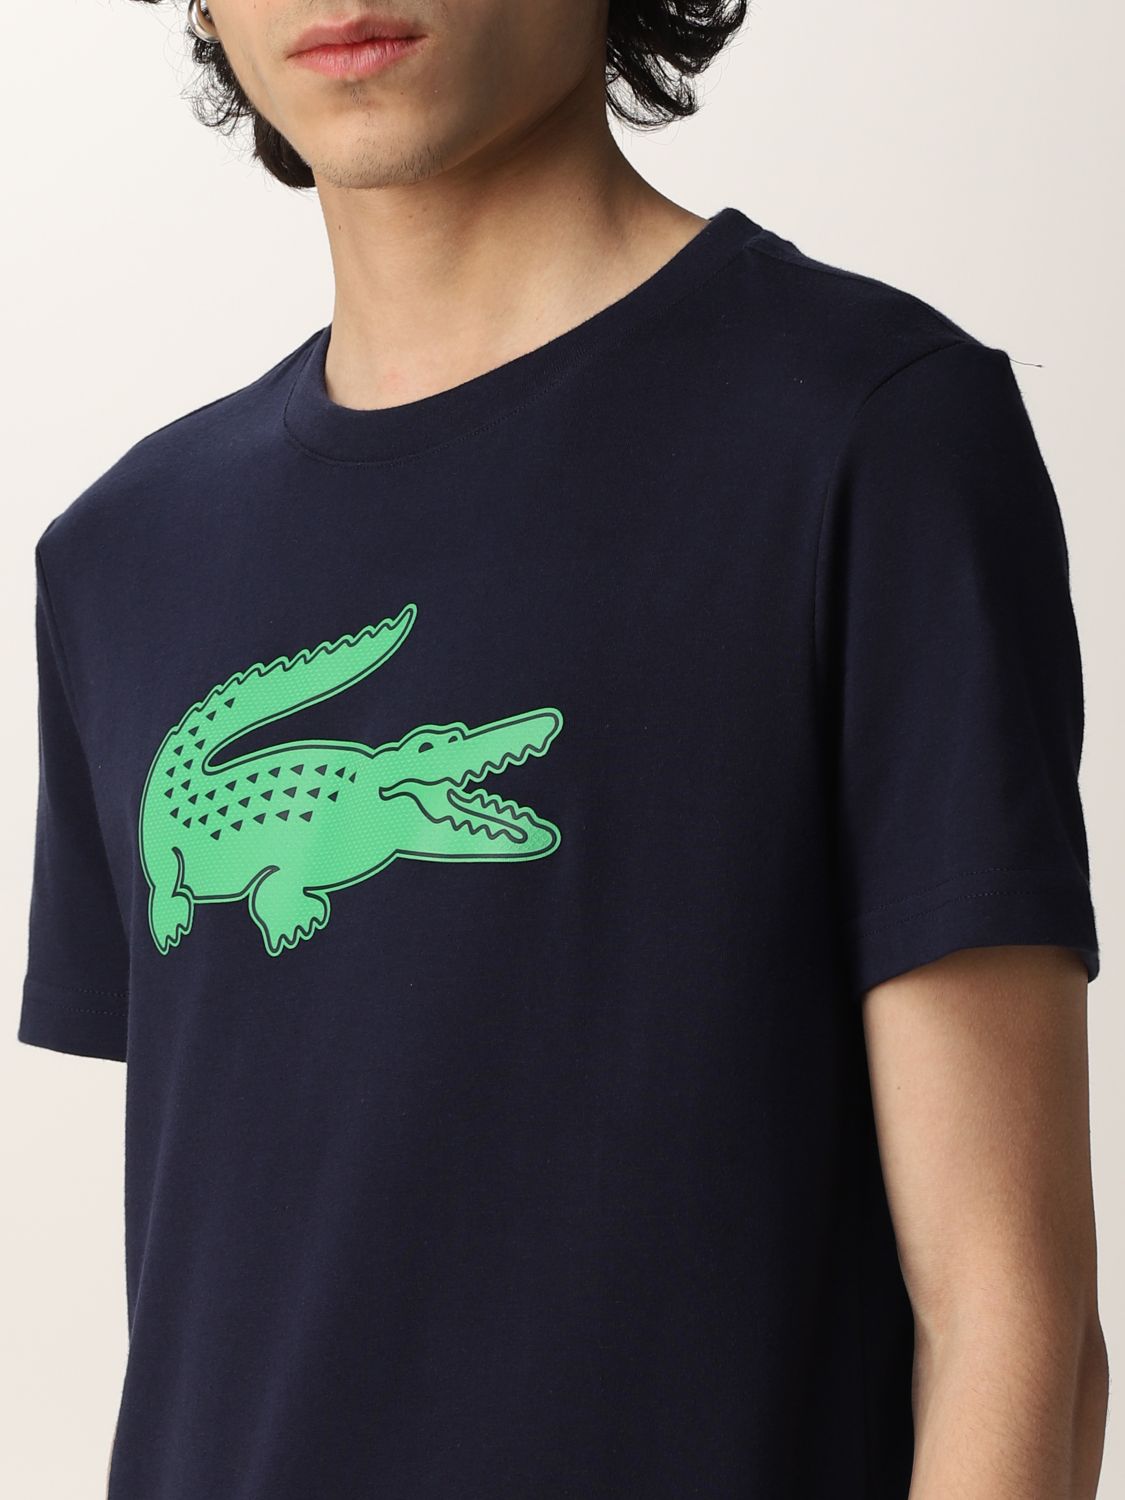 Lacoste Tシャツ メンズ ブルー Giglio Comオンラインのlacoste Tシャツ Th42